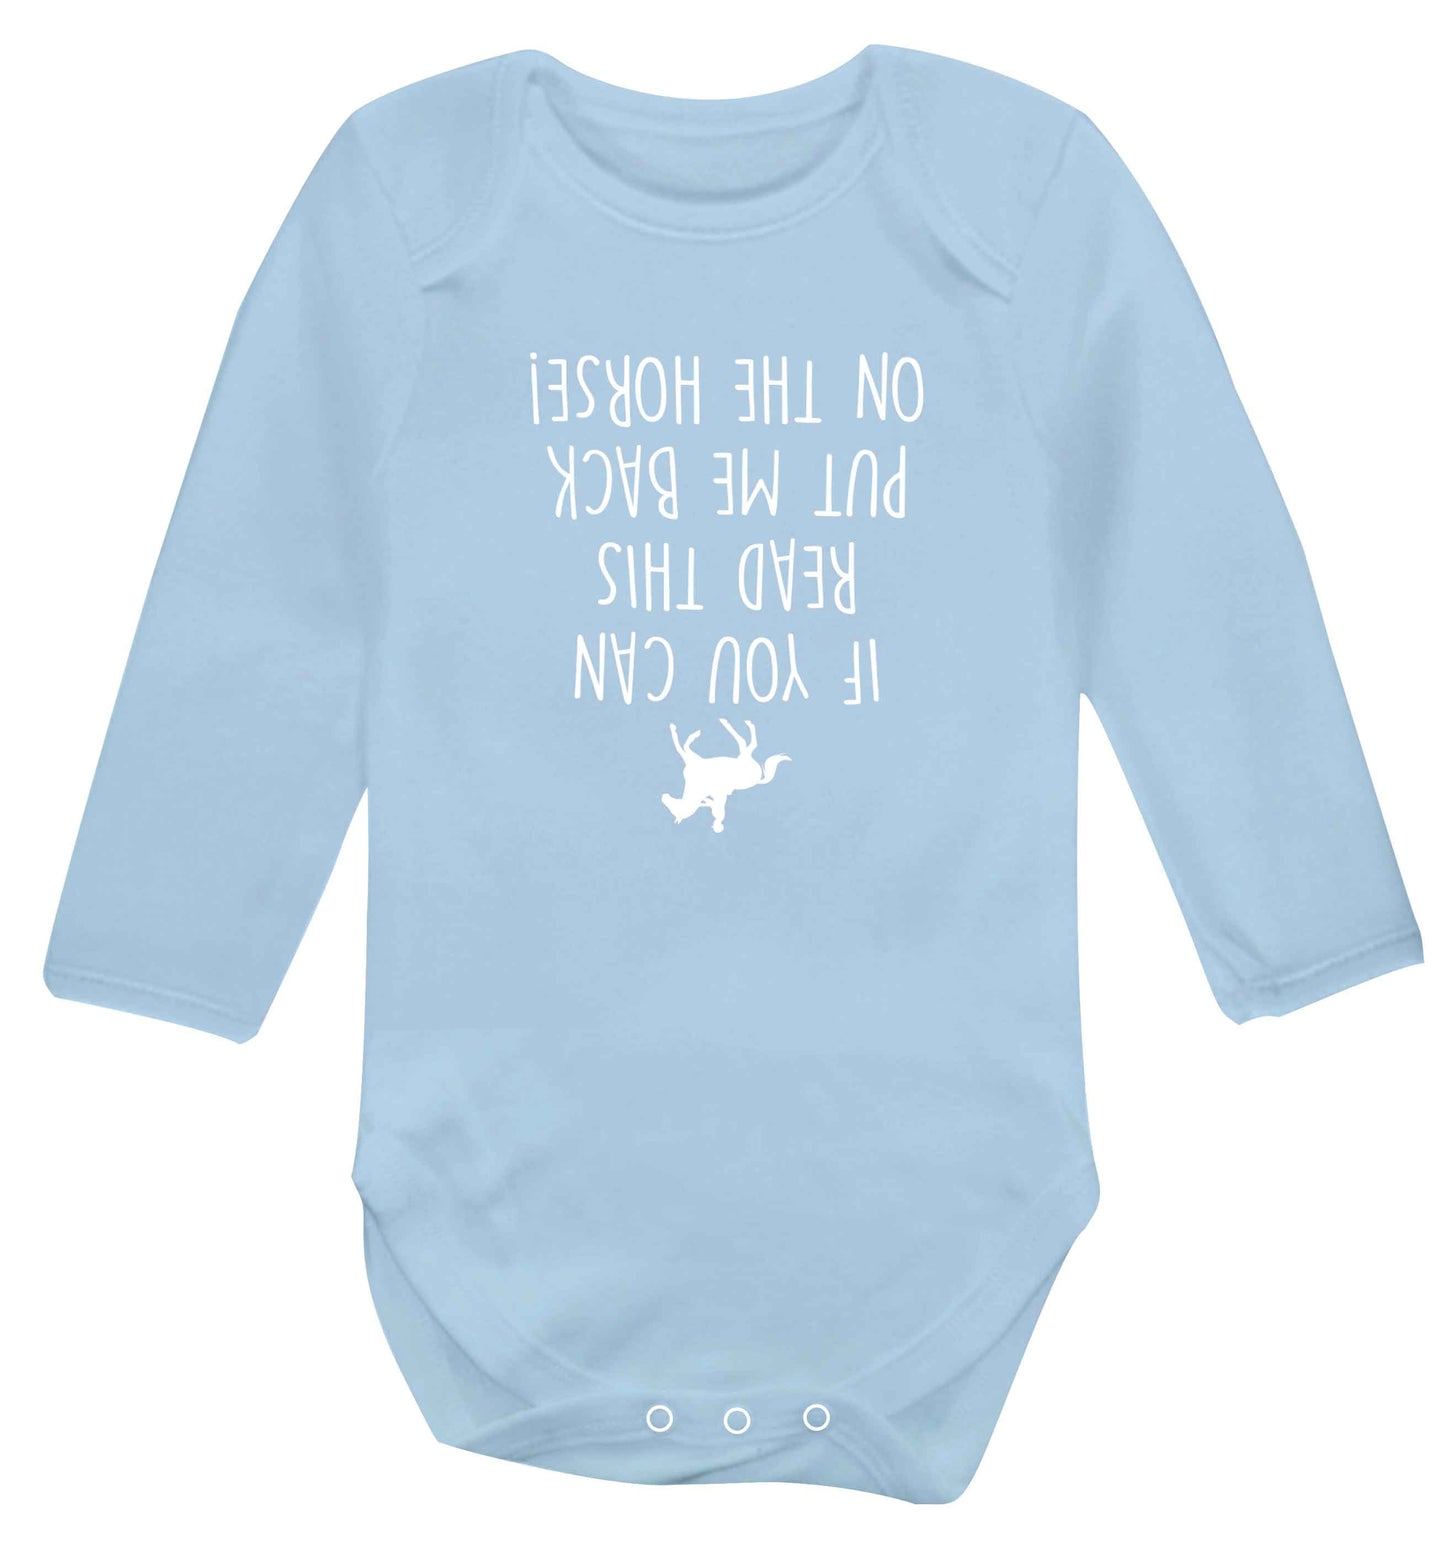 If you can read this put me back on the horse baby vest long sleeved pale blue 6-12 months